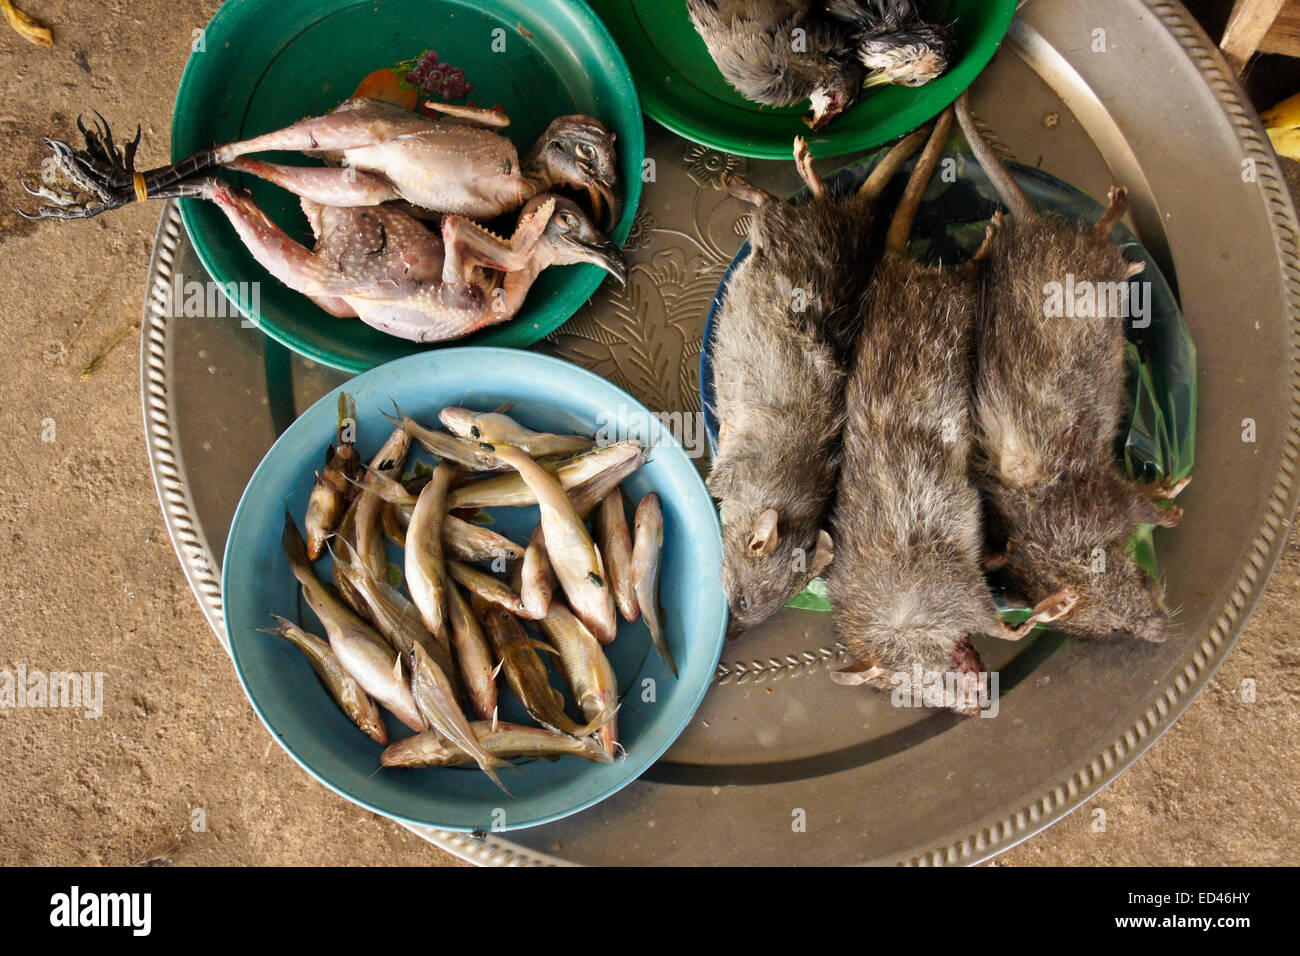 Wild birds and animals for sale in market, Laos Stock Photo